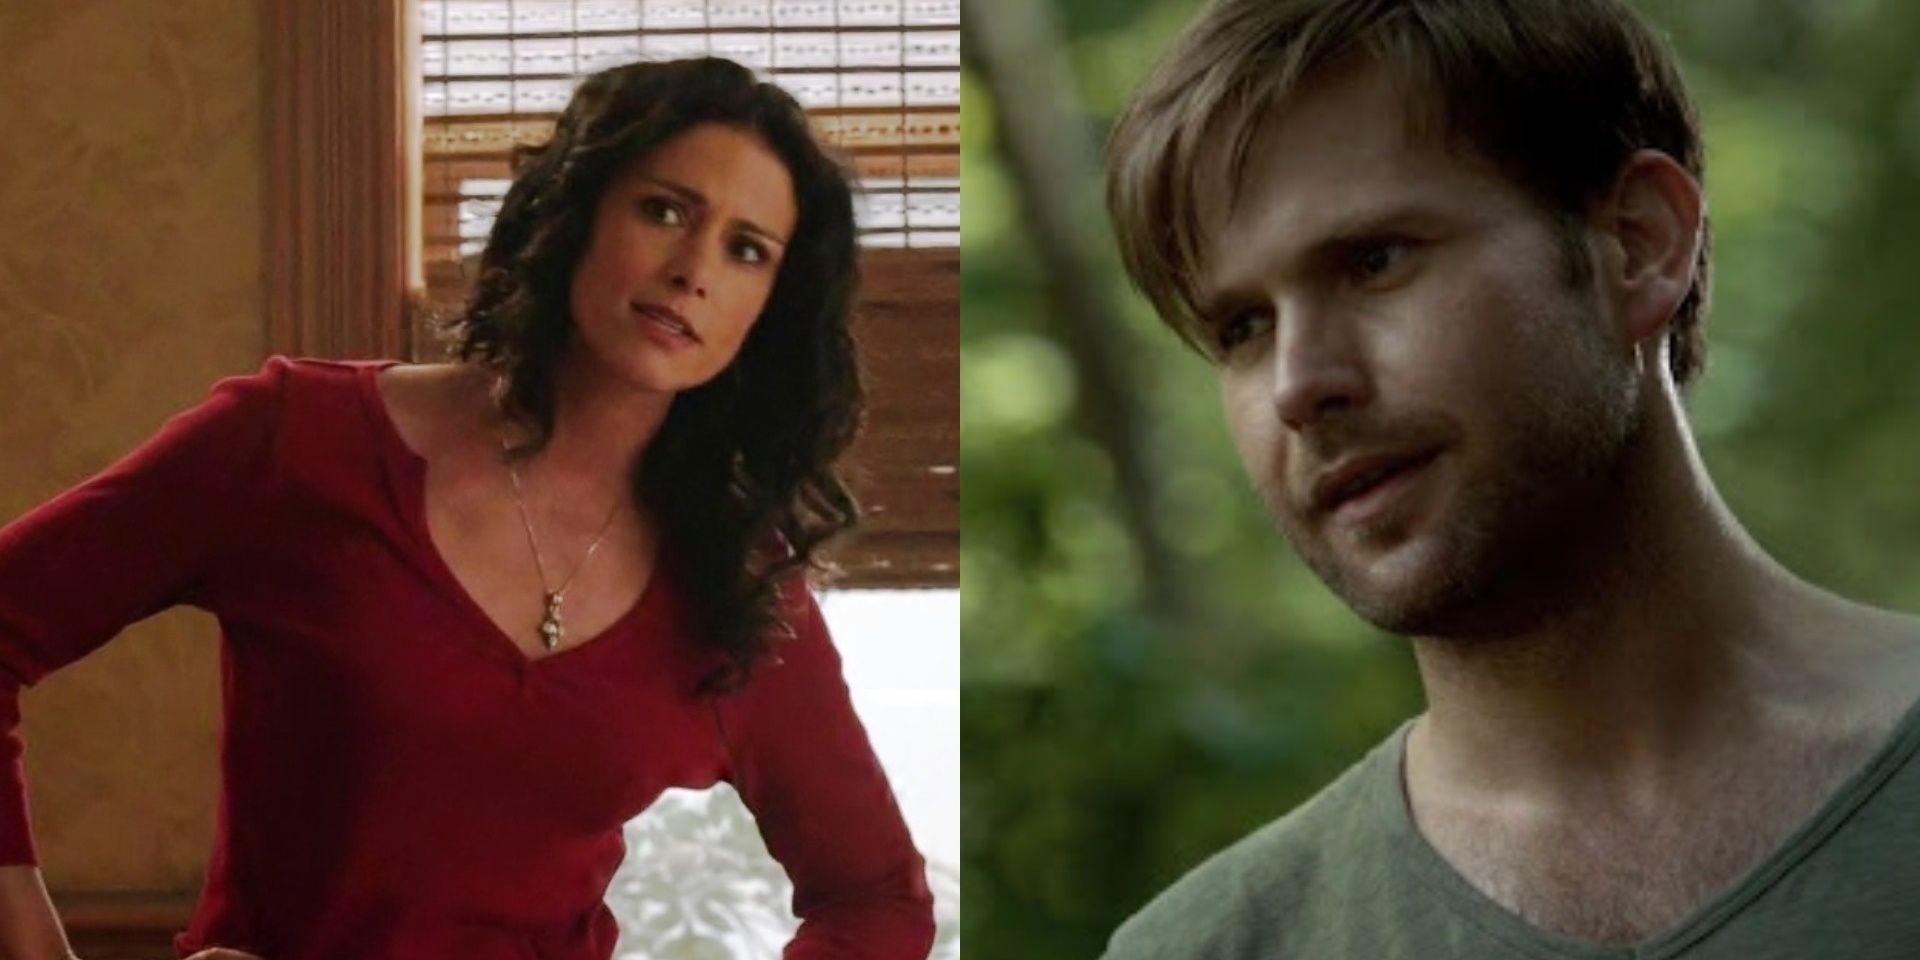 Melissa Mccall and alaric split photo from teen wolf and vampire diaries